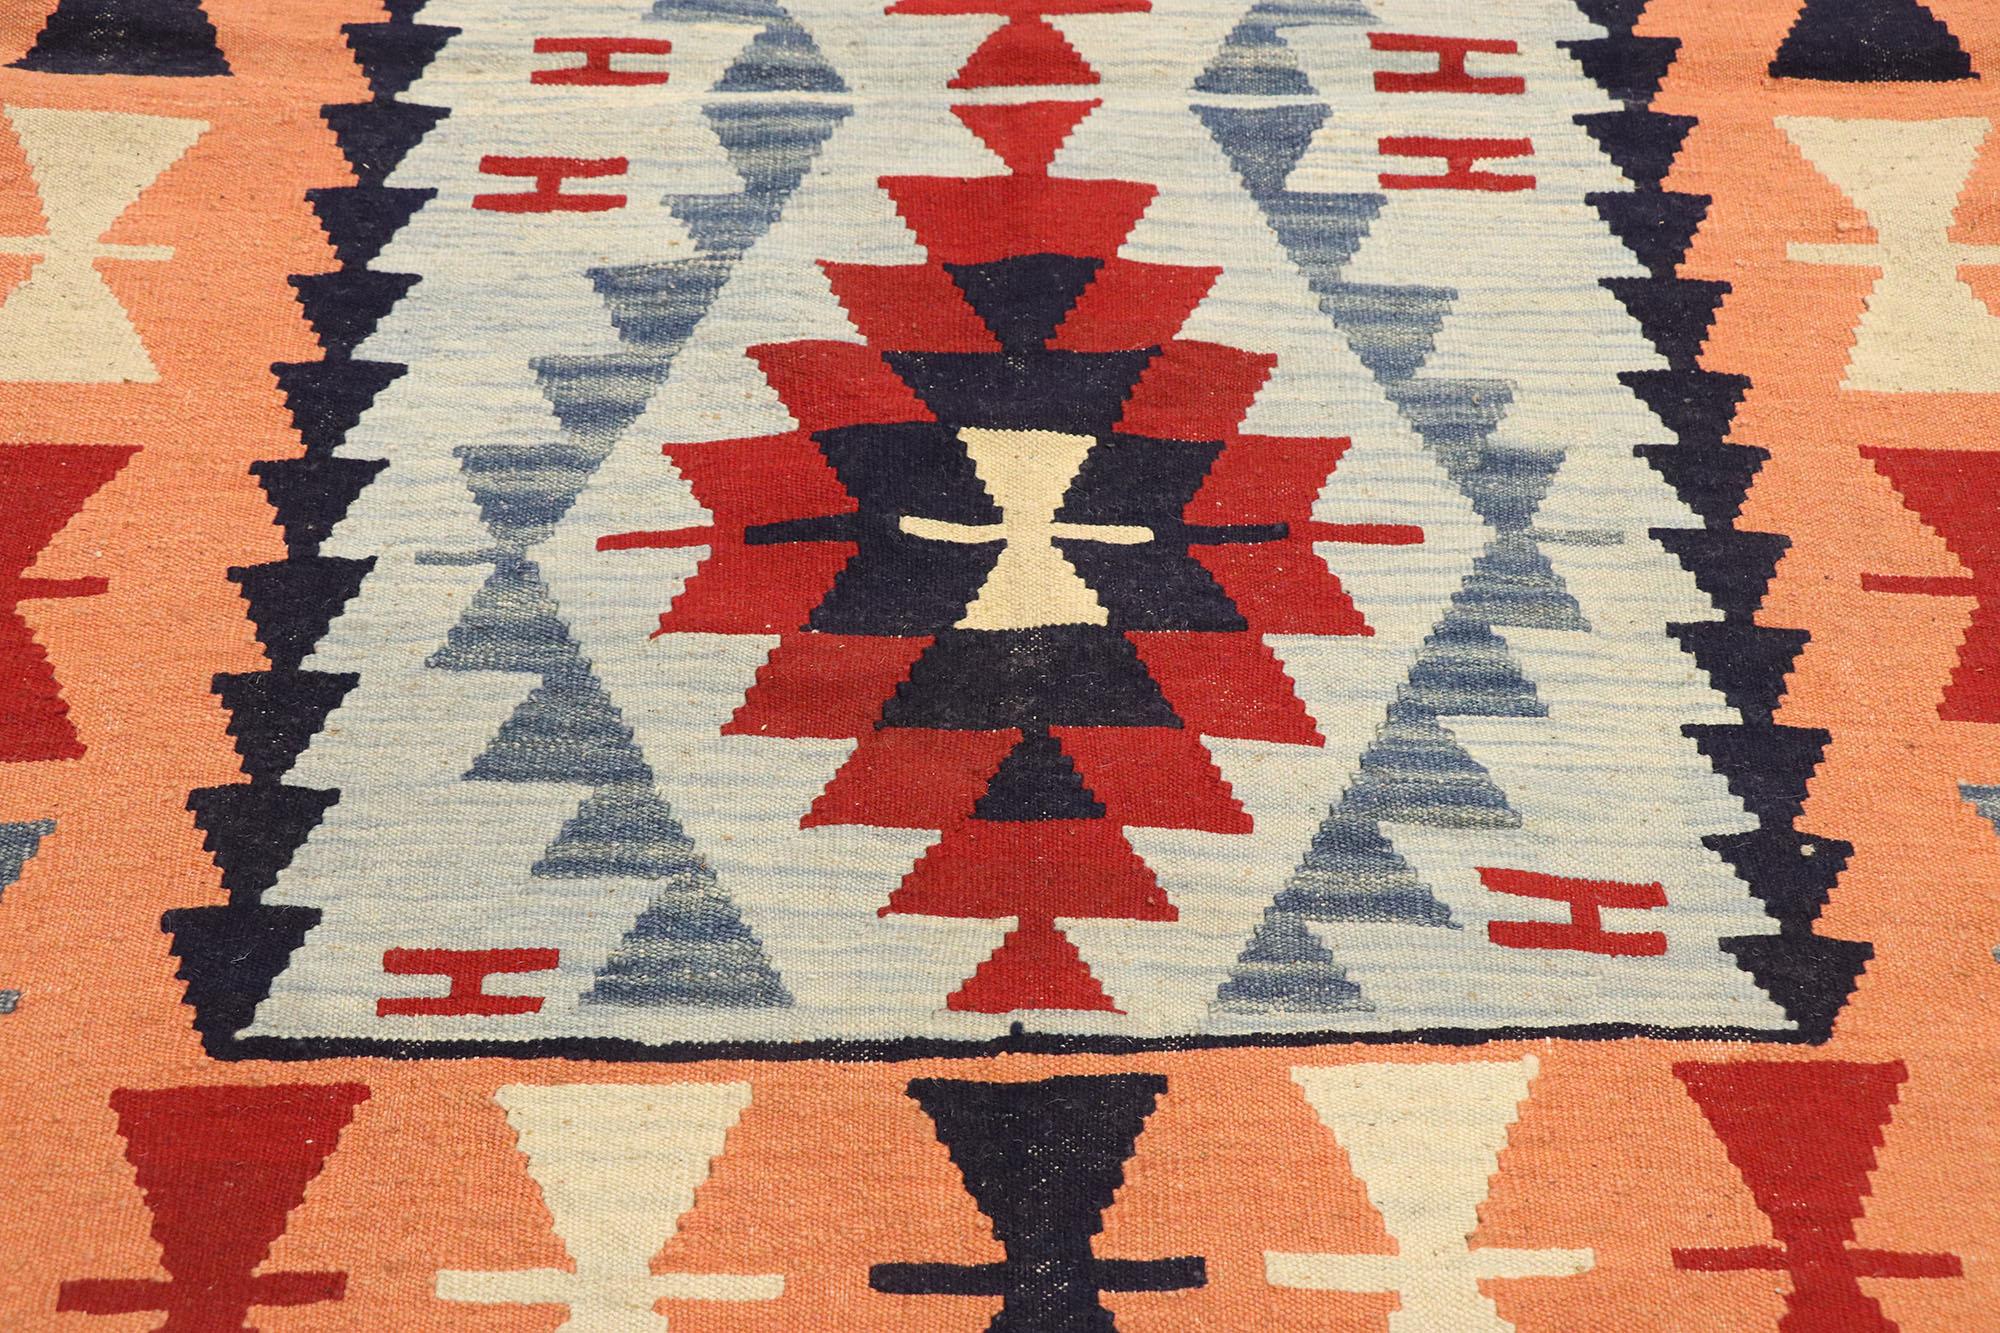 Vintage Persian Shiraz Kilim Rug, Luxury Lodge Meets Sunny Southwest Style In Good Condition For Sale In Dallas, TX